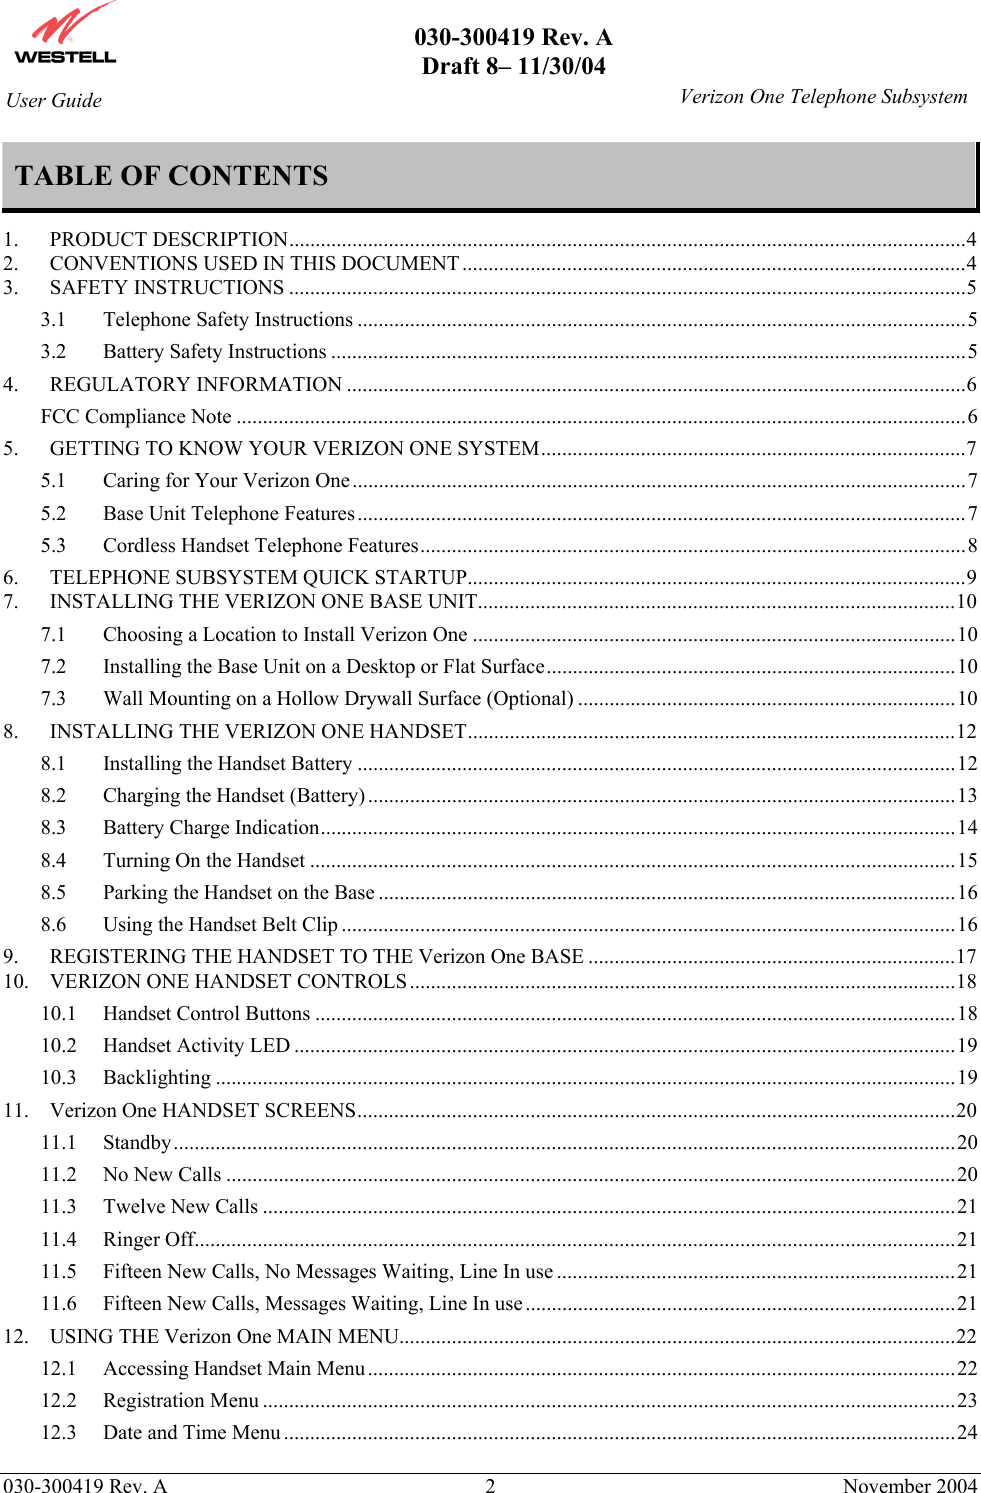       030-300419 Rev. A Draft 8– 11/30/04    030-300419 Rev. A  2  November 2004 User Guide   Verizon One Telephone SubsystemTABLE OF CONTENTS  1. PRODUCT DESCRIPTION.................................................................................................................................4 2. CONVENTIONS USED IN THIS DOCUMENT................................................................................................4 3. SAFETY INSTRUCTIONS .................................................................................................................................5 3.1 Telephone Safety Instructions ....................................................................................................................5 3.2 Battery Safety Instructions .........................................................................................................................5 4. REGULATORY INFORMATION ......................................................................................................................6 FCC Compliance Note ...........................................................................................................................................6 5. GETTING TO KNOW YOUR VERIZON ONE SYSTEM.................................................................................7 5.1 Caring for Your Verizon One.....................................................................................................................7 5.2 Base Unit Telephone Features....................................................................................................................7 5.3 Cordless Handset Telephone Features........................................................................................................8 6. TELEPHONE SUBSYSTEM QUICK STARTUP...............................................................................................9 7. INSTALLING THE VERIZON ONE BASE UNIT...........................................................................................10 7.1 Choosing a Location to Install Verizon One ............................................................................................10 7.2 Installing the Base Unit on a Desktop or Flat Surface..............................................................................10 7.3 Wall Mounting on a Hollow Drywall Surface (Optional) ........................................................................10 8. INSTALLING THE VERIZON ONE HANDSET.............................................................................................12 8.1 Installing the Handset Battery ..................................................................................................................12 8.2 Charging the Handset (Battery) ................................................................................................................13 8.3 Battery Charge Indication.........................................................................................................................14 8.4 Turning On the Handset ...........................................................................................................................15 8.5 Parking the Handset on the Base ..............................................................................................................16 8.6 Using the Handset Belt Clip .....................................................................................................................16 9. REGISTERING THE HANDSET TO THE Verizon One BASE ......................................................................17 10. VERIZON ONE HANDSET CONTROLS........................................................................................................18 10.1 Handset Control Buttons ..........................................................................................................................18 10.2 Handset Activity LED ..............................................................................................................................19 10.3 Backlighting .............................................................................................................................................19 11. Verizon One HANDSET SCREENS..................................................................................................................20 11.1 Standby.....................................................................................................................................................20 11.2 No New Calls ...........................................................................................................................................20 11.3 Twelve New Calls ....................................................................................................................................21 11.4 Ringer Off.................................................................................................................................................21 11.5 Fifteen New Calls, No Messages Waiting, Line In use ............................................................................21 11.6 Fifteen New Calls, Messages Waiting, Line In use..................................................................................21 12. USING THE Verizon One MAIN MENU..........................................................................................................22 12.1 Accessing Handset Main Menu ................................................................................................................22 12.2 Registration Menu ....................................................................................................................................23 12.3 Date and Time Menu ................................................................................................................................24 